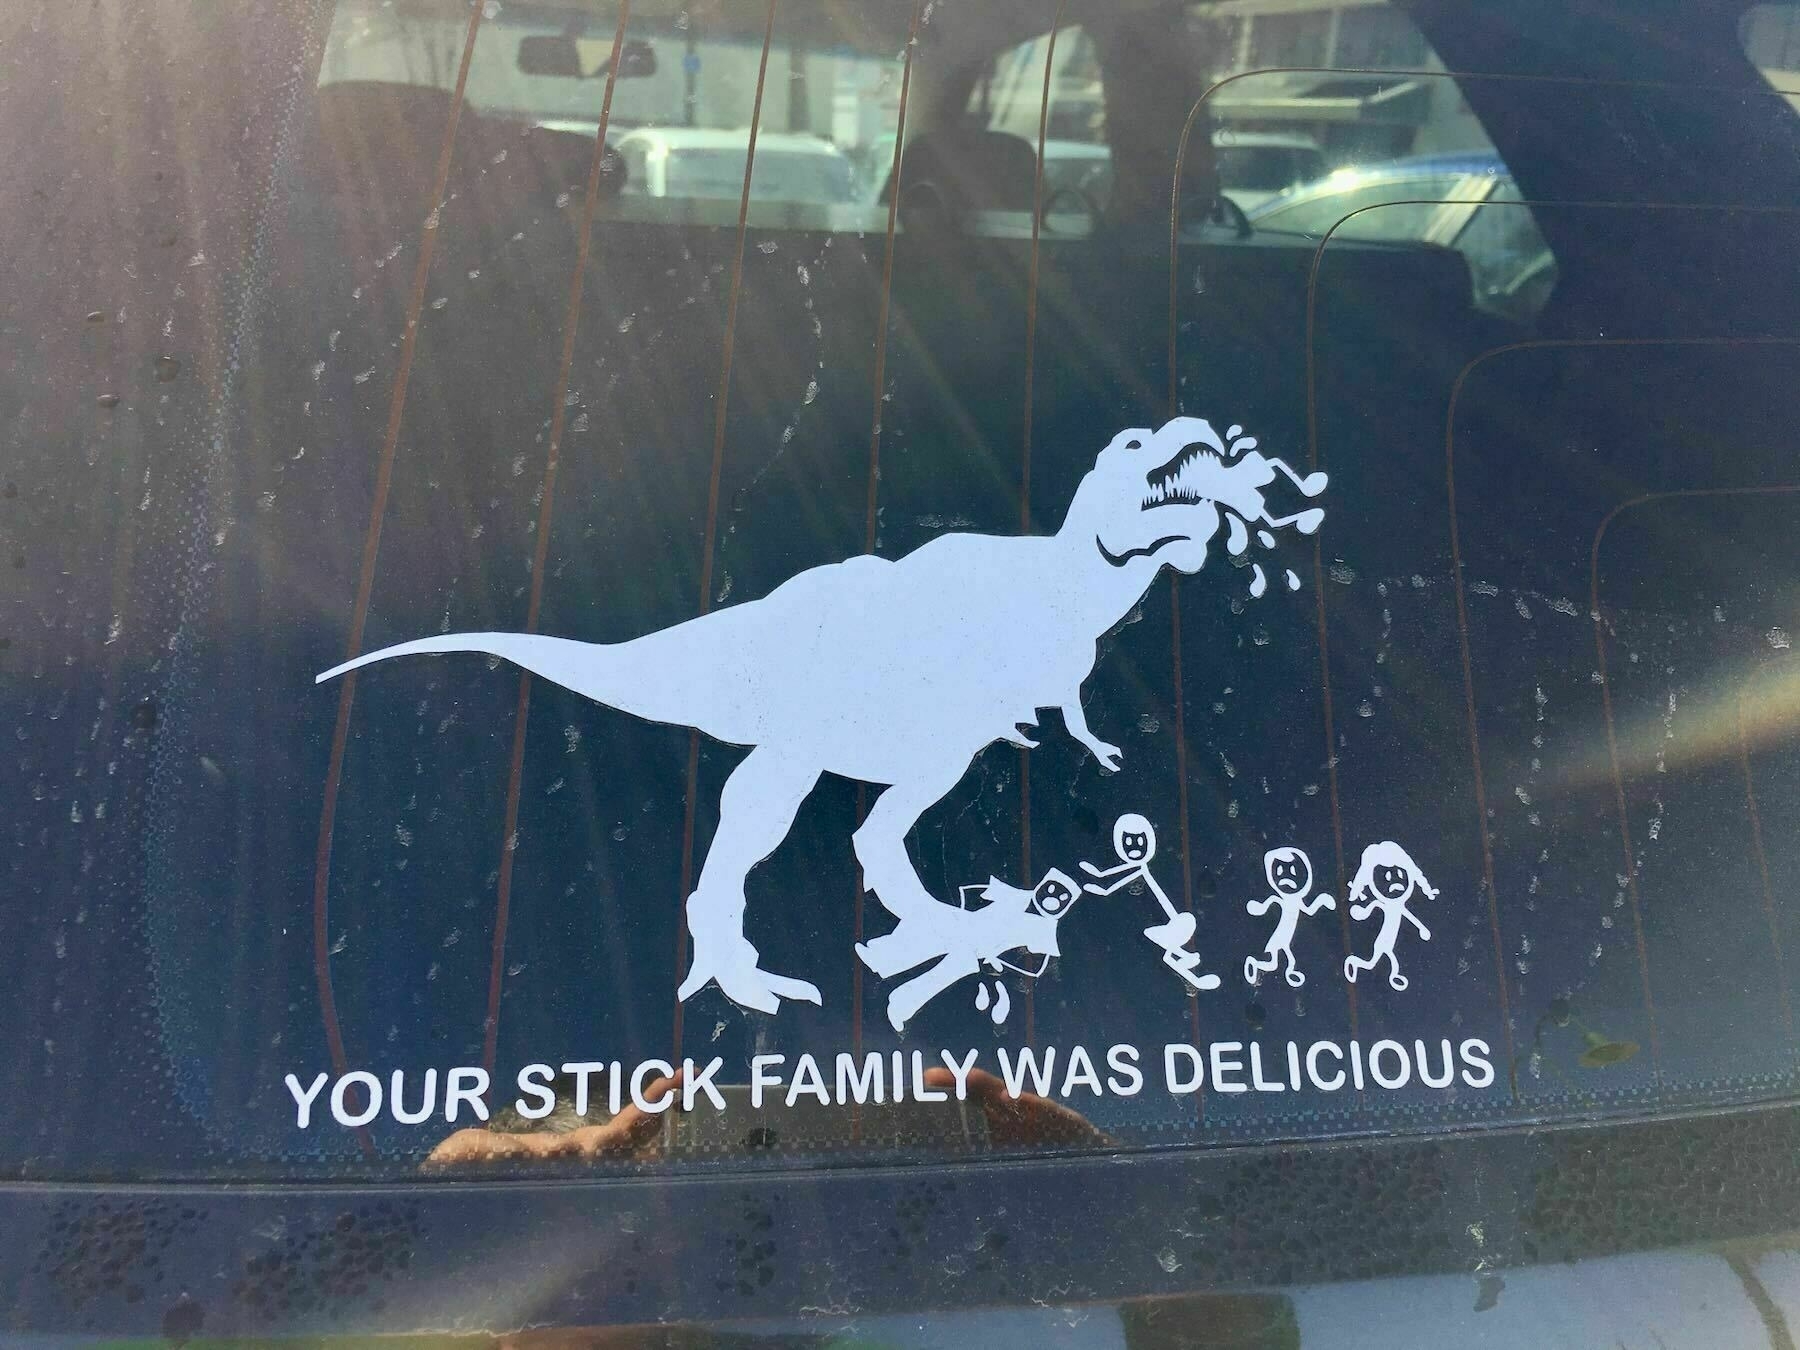 Car sticker that shows a dinosaur eating stick figures, captioned Your stick family was delicious.